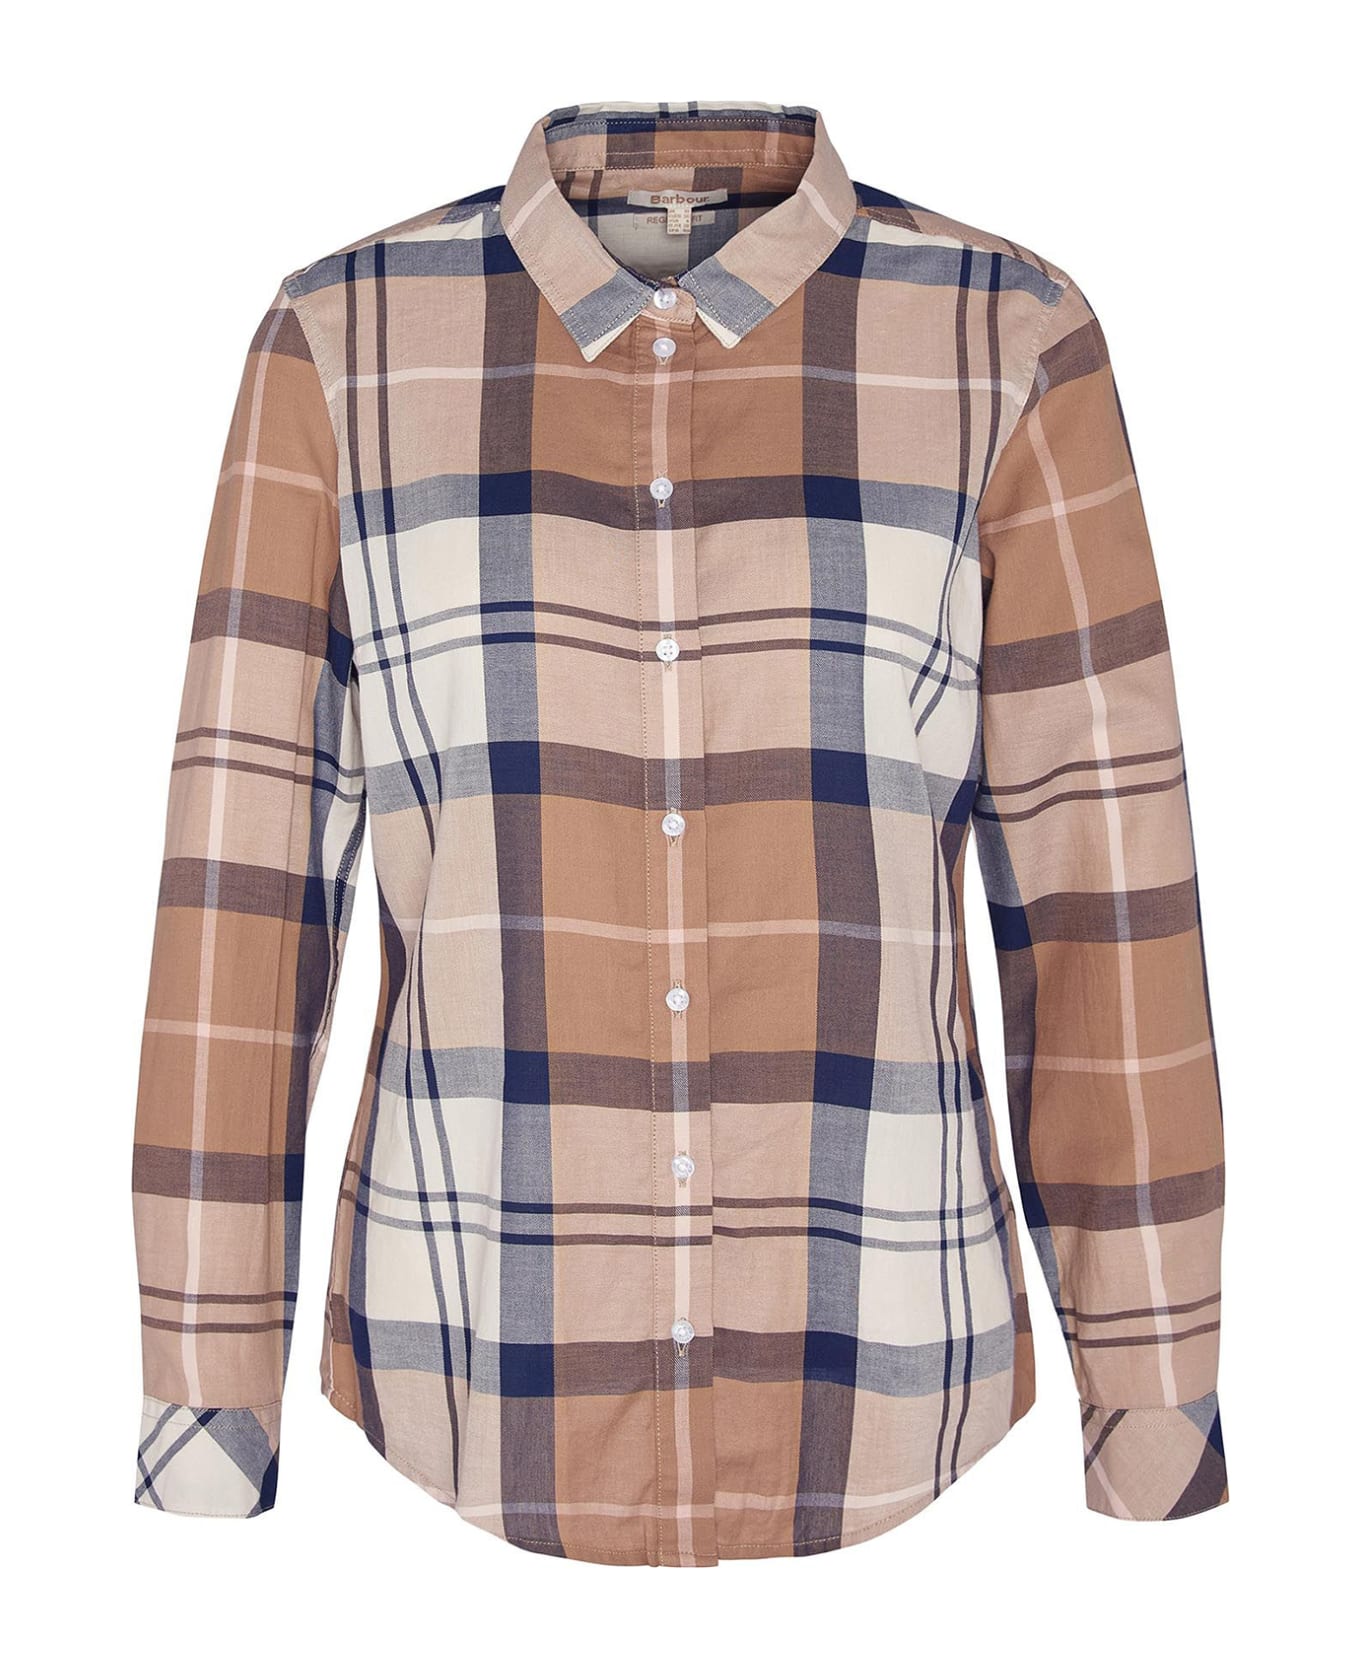 Barbour Long Sleeve Checked Shirt - Thom Browne Fun-Mix super 120s wool flannel jacket